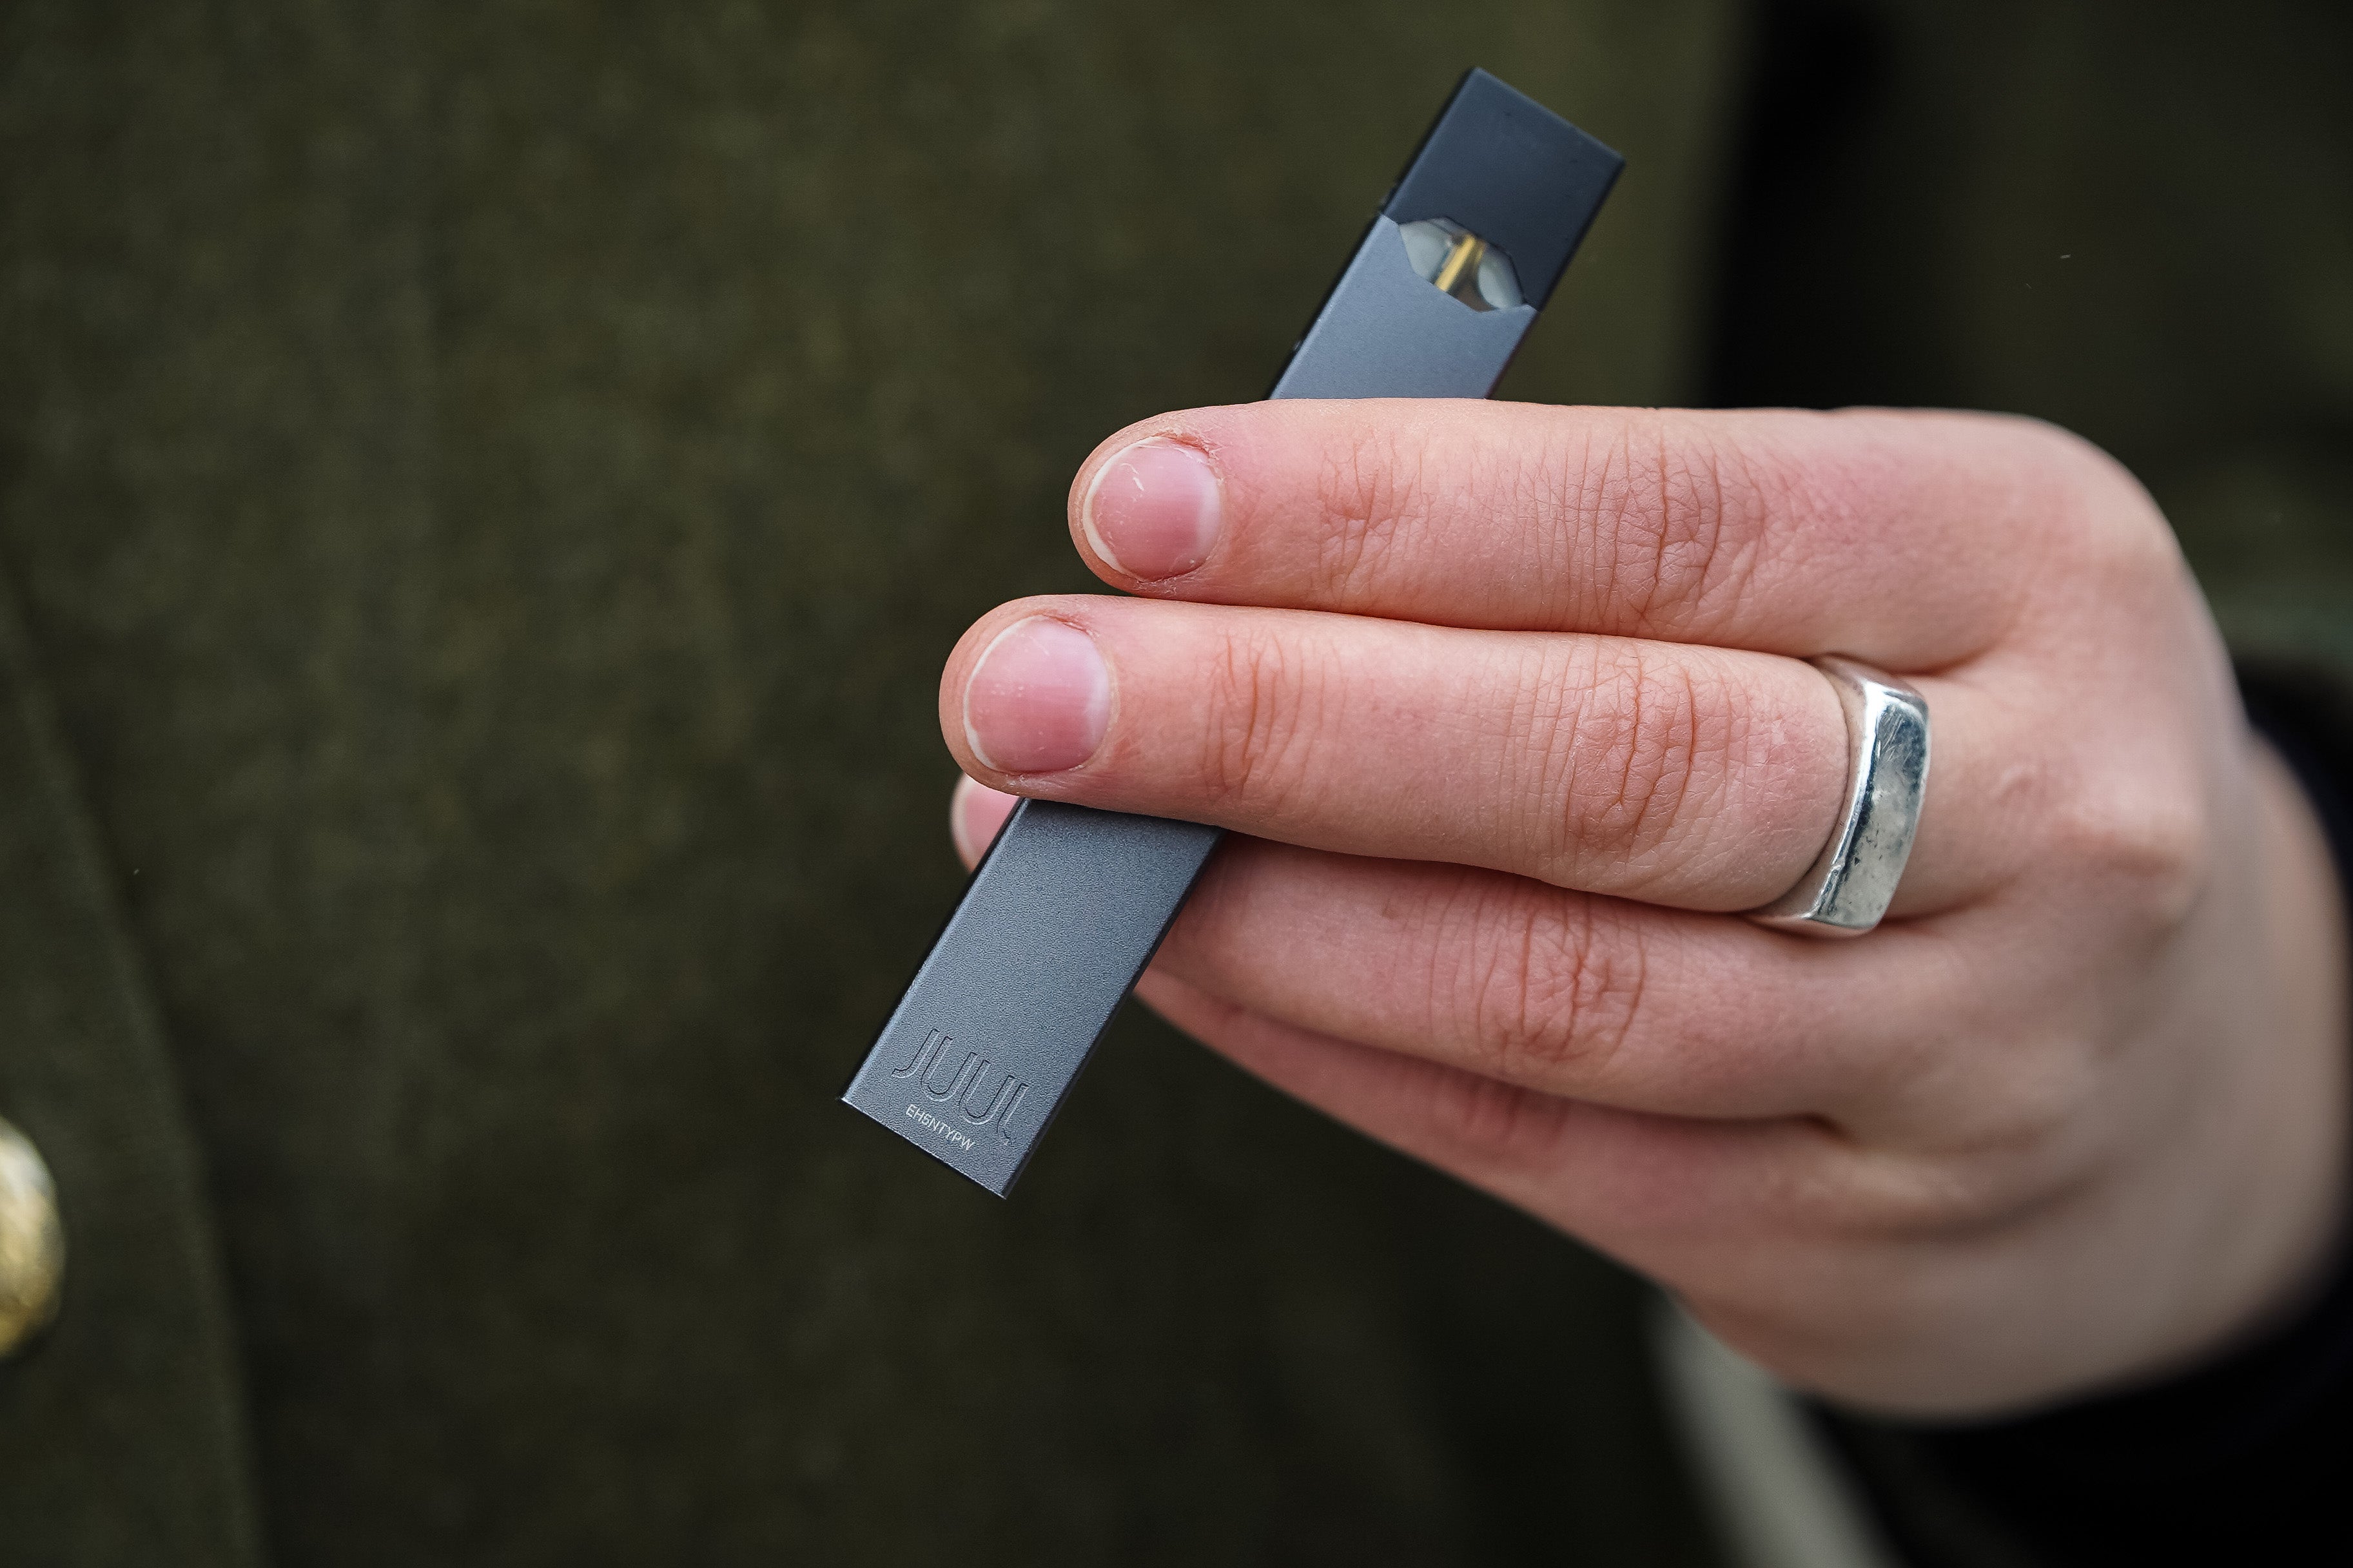 Juul, the e-cigarette, has scored a big win as the Food and Drug Administration rescinded its marketing ban on the product on Thursday.